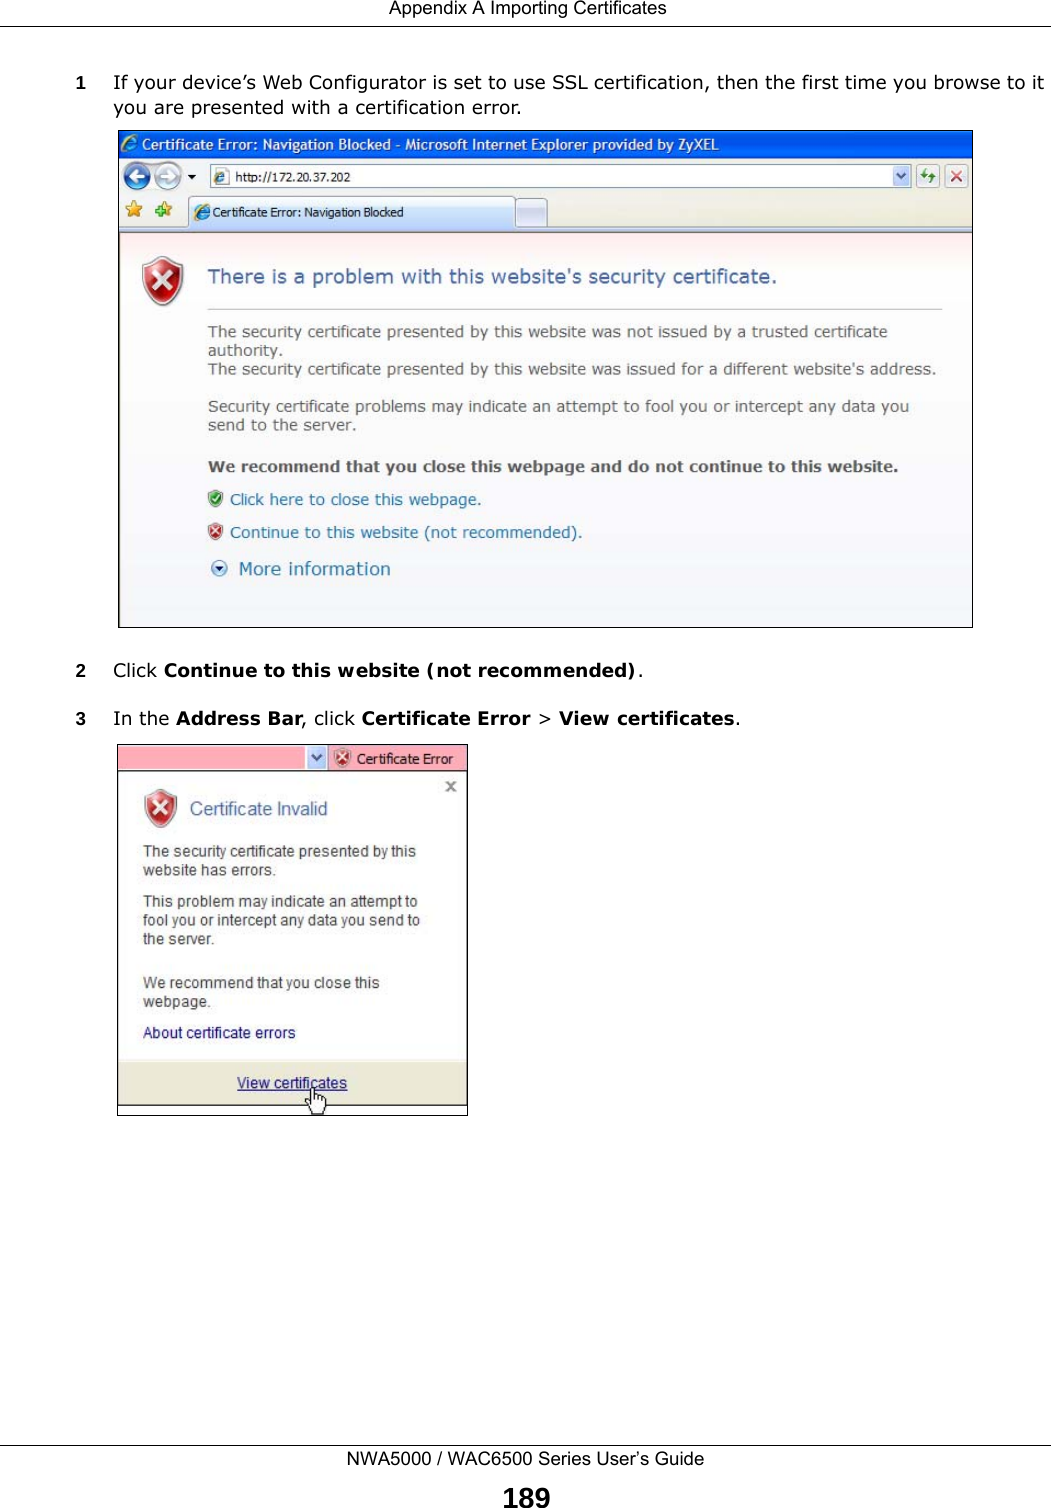  Appendix A Importing CertificatesNWA5000 / WAC6500 Series User’s Guide1891If your device’s Web Configurator is set to use SSL certification, then the first time you browse to it you are presented with a certification error.2Click Continue to this website (not recommended).3In the Address Bar, click Certificate Error &gt; View certificates.